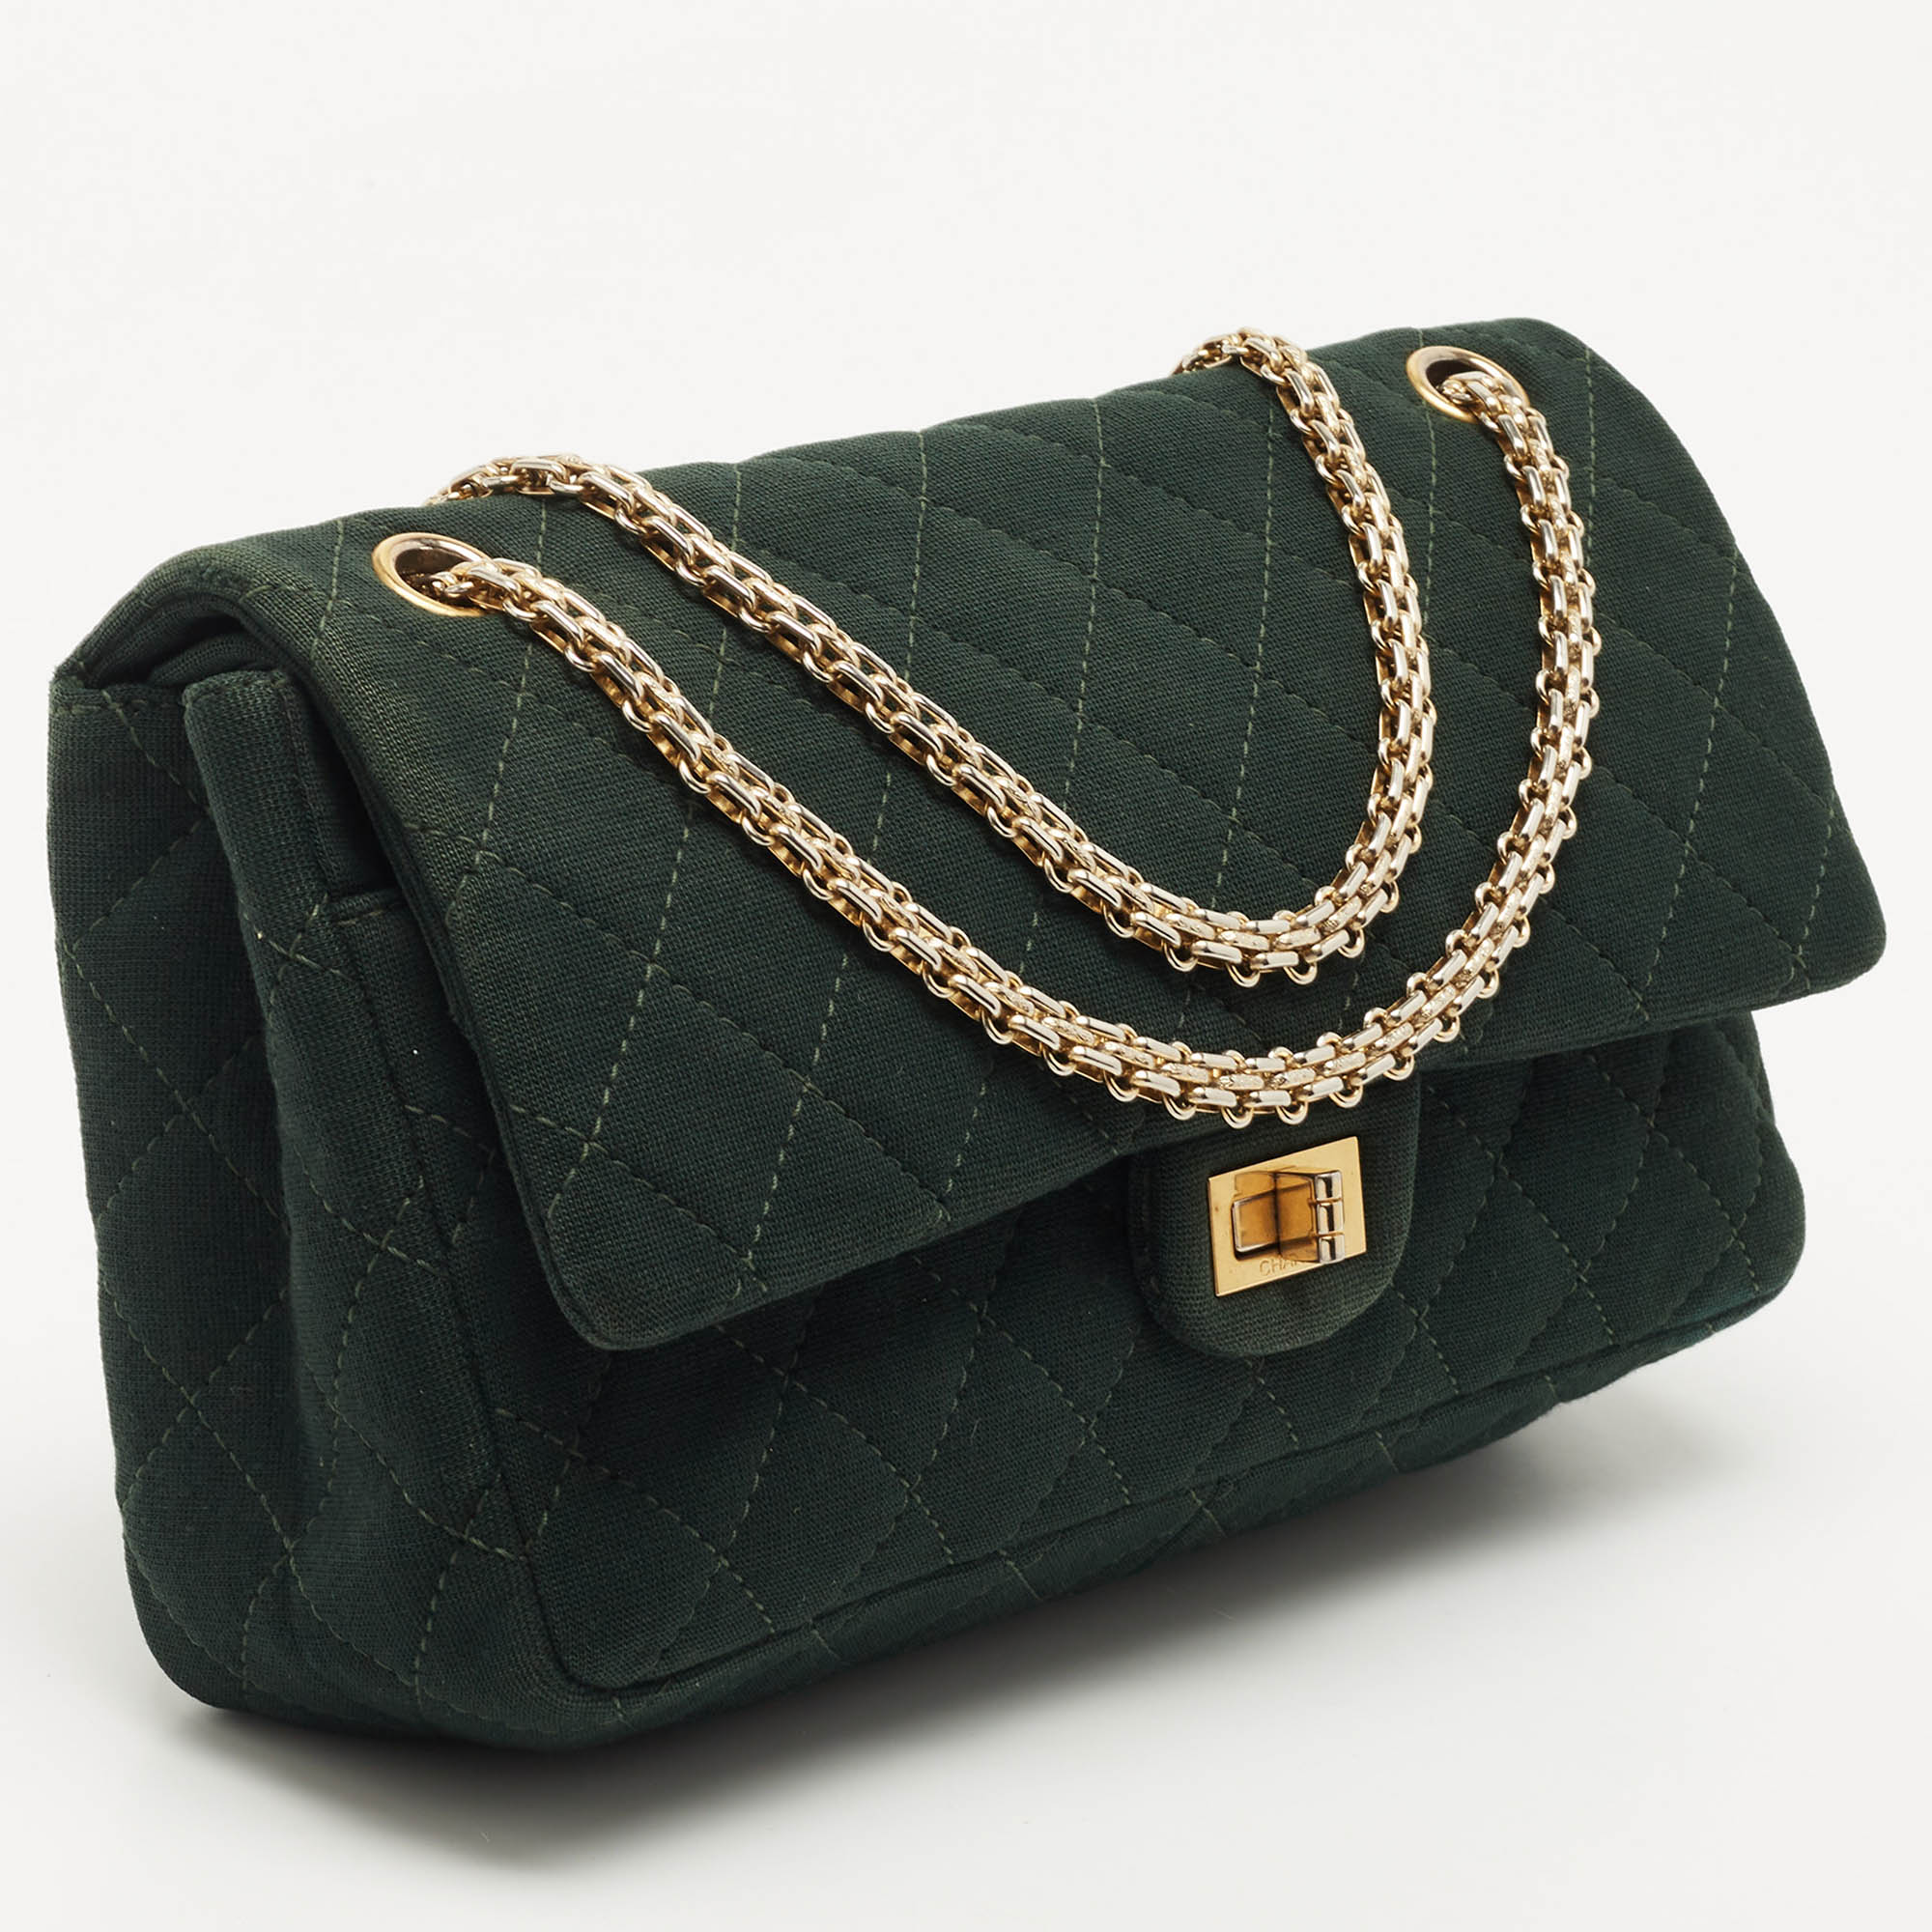 Chanel Emerald Green Quilted Jersey Reissue 2.55 Classic 226 Flap Bag Chanel